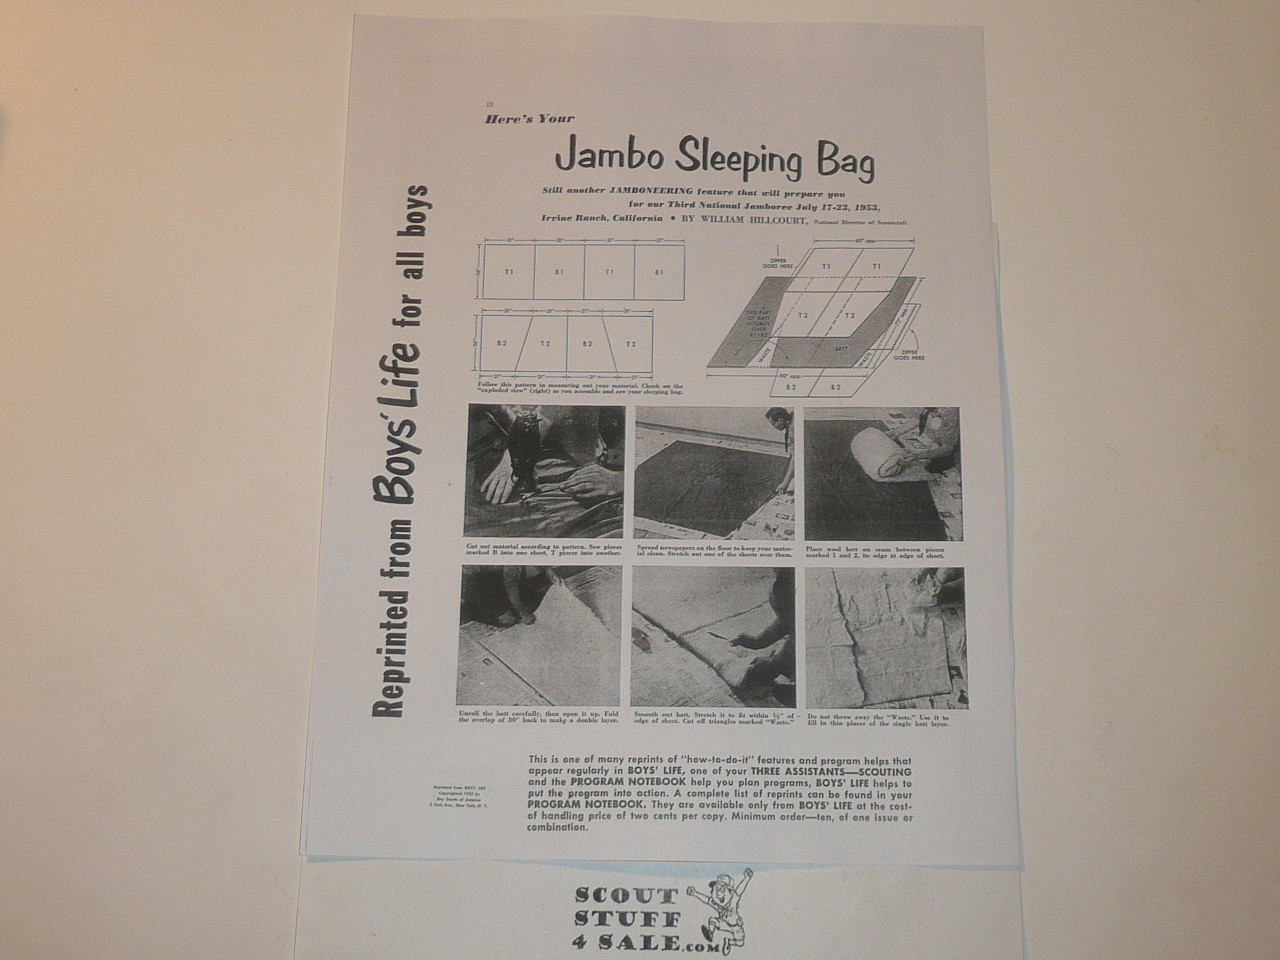 Jambo Sleeping Bag, By Green Bar Bill, Boys' Life Single Topic Reprint from the 1950's - 1960's , written for Scouts, great teaching materials